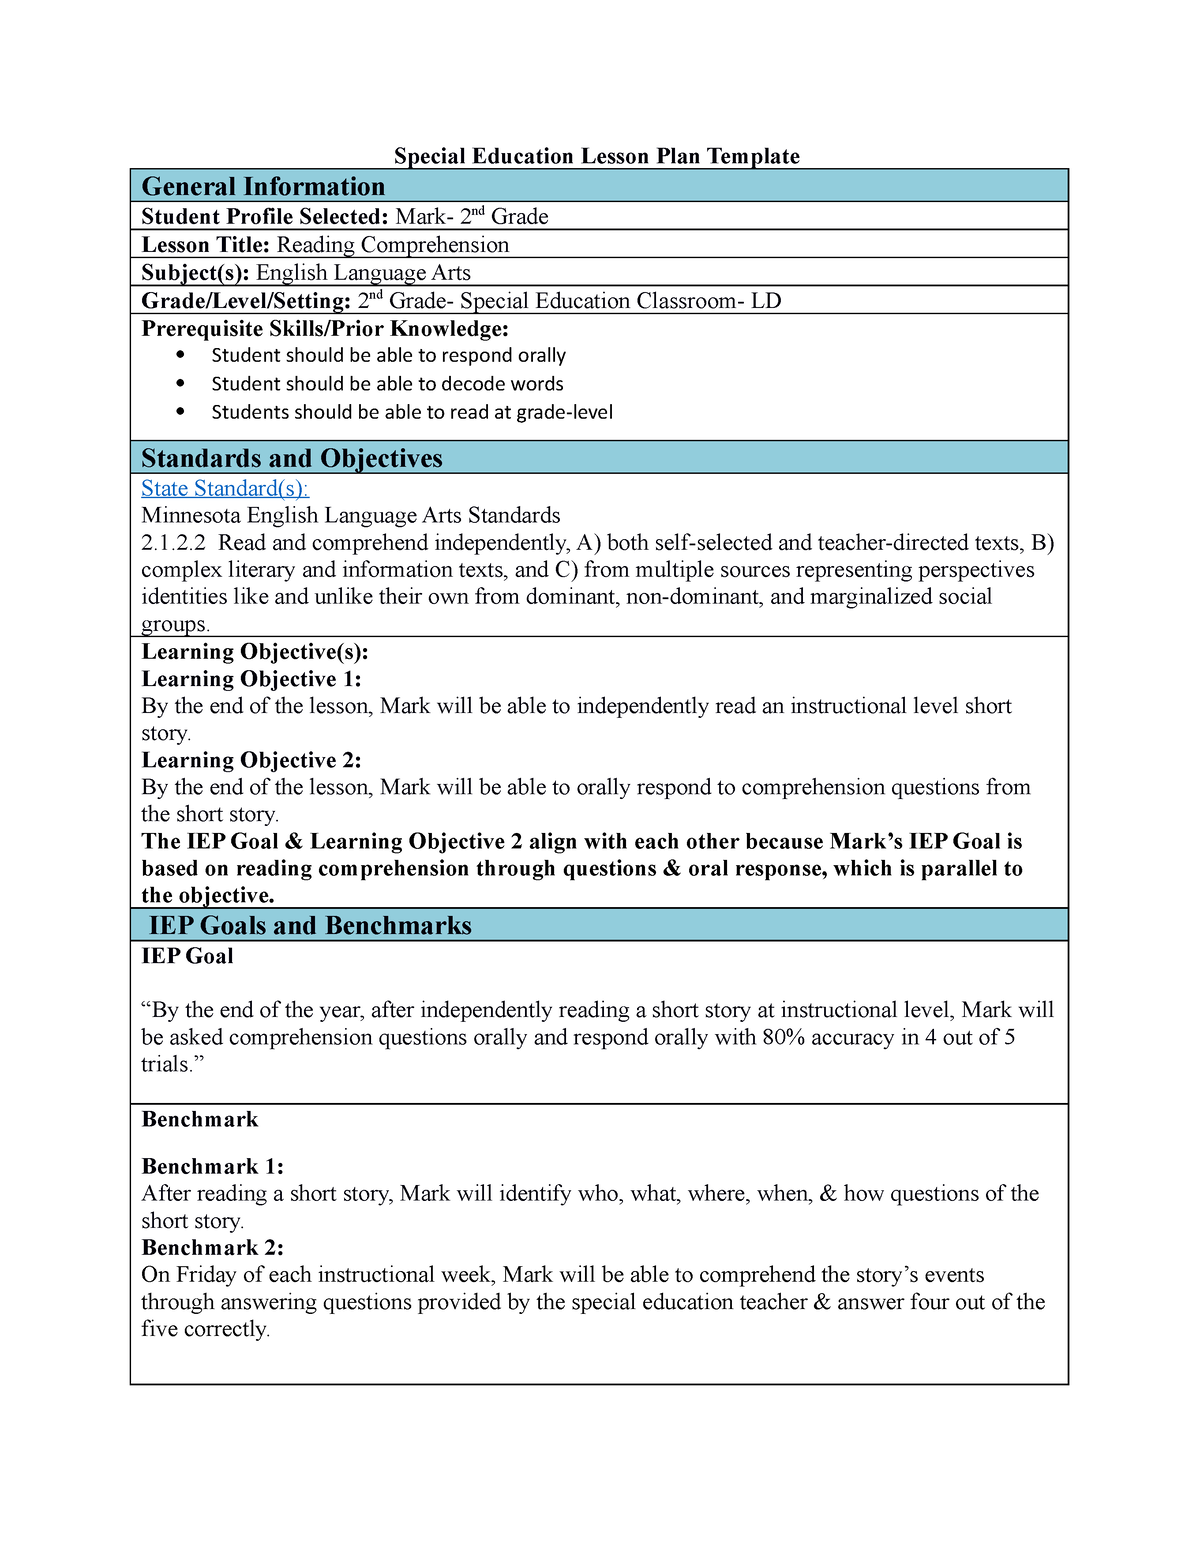 SPED Lesson Plan 1 Assingment for Special Education Special